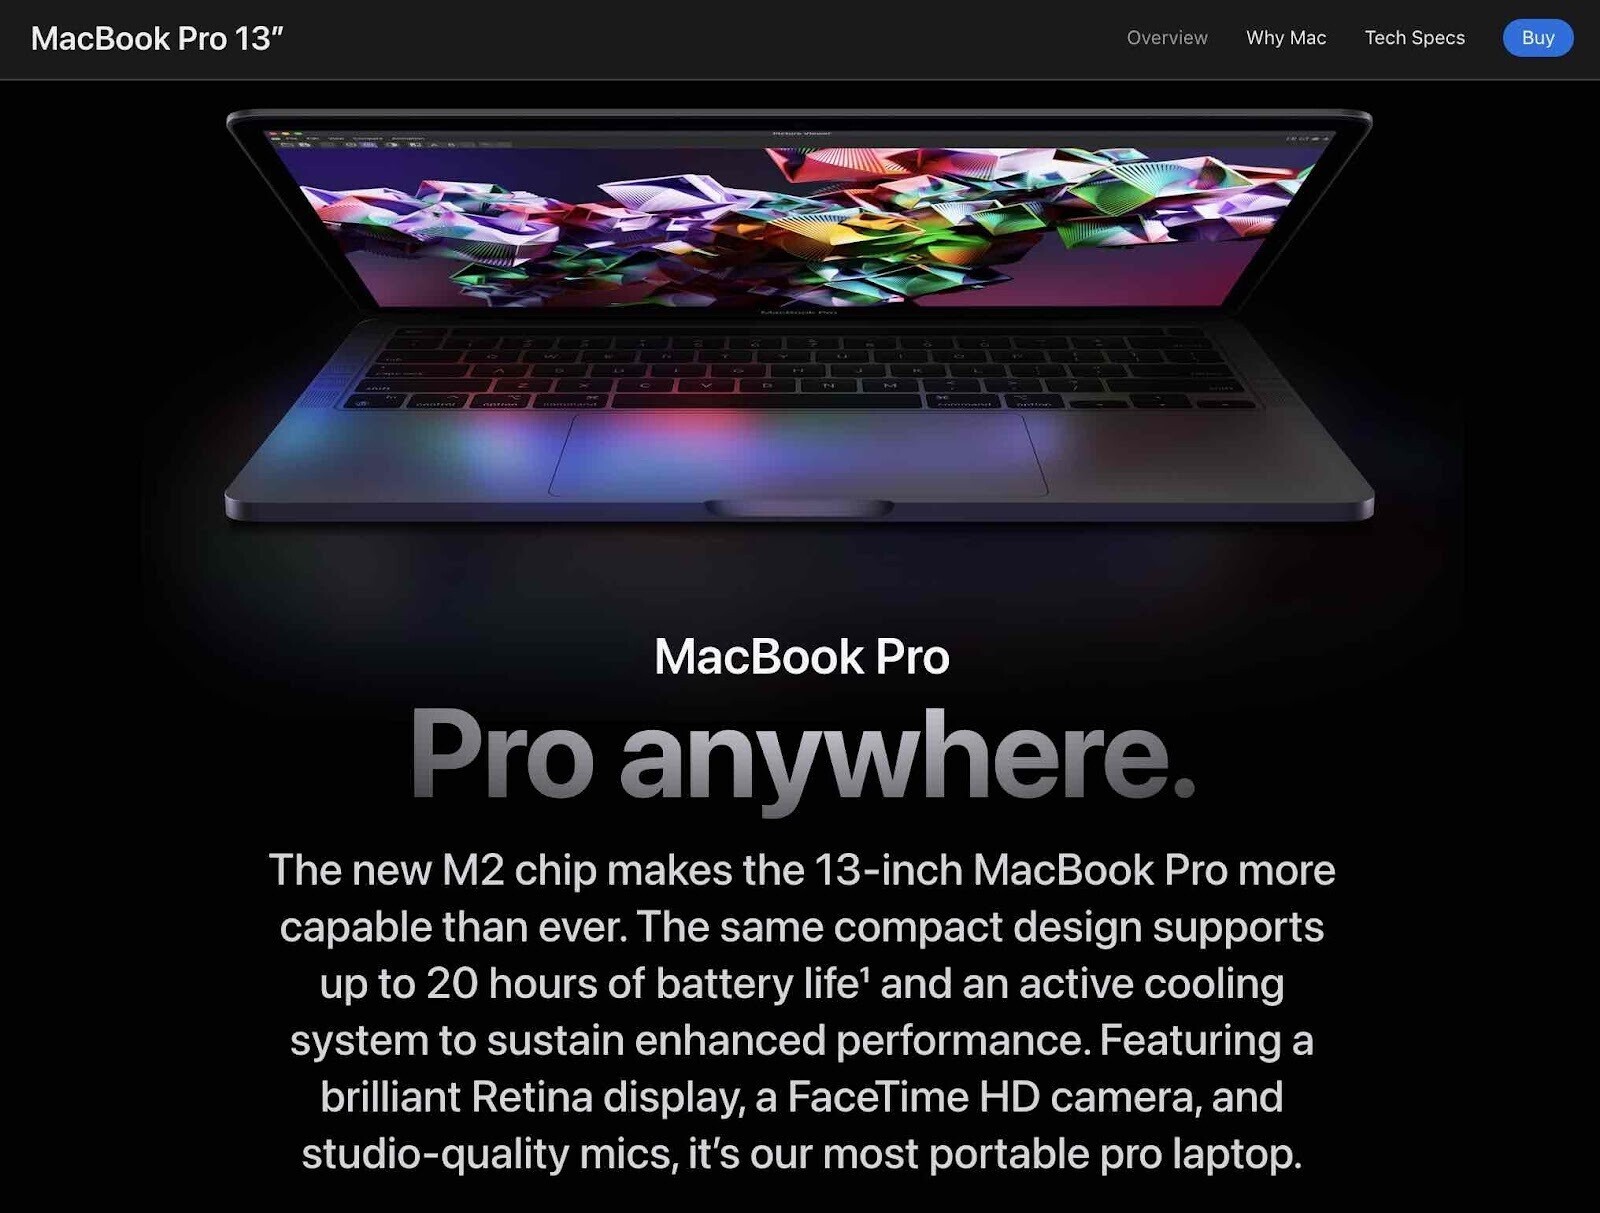 macbook pro key product features